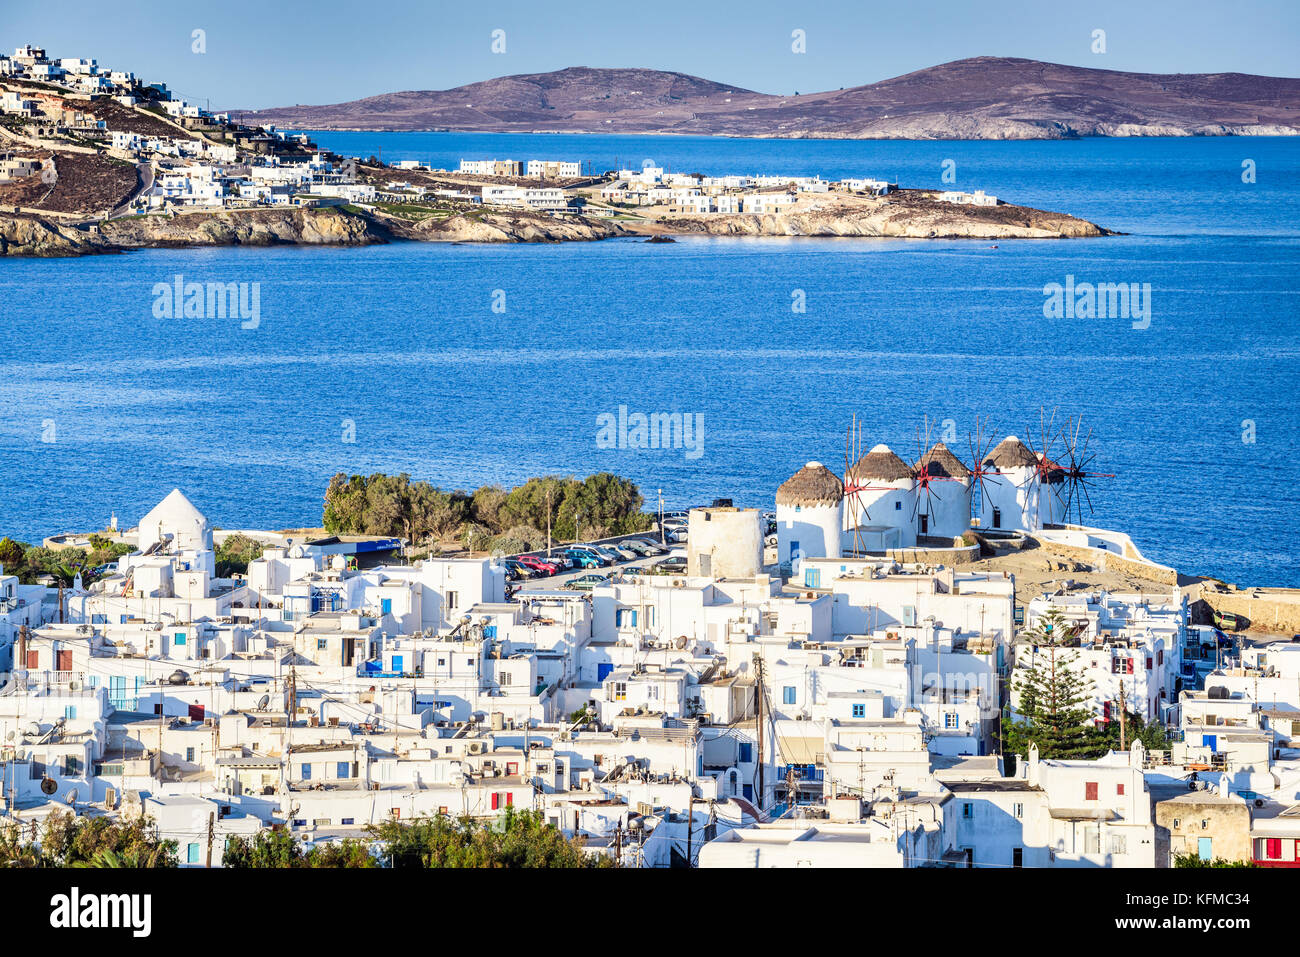 Mykonos, Greece. Windmills are iconic feature of the Greek island of the Mykonos, Cyclades Islands. Stock Photo